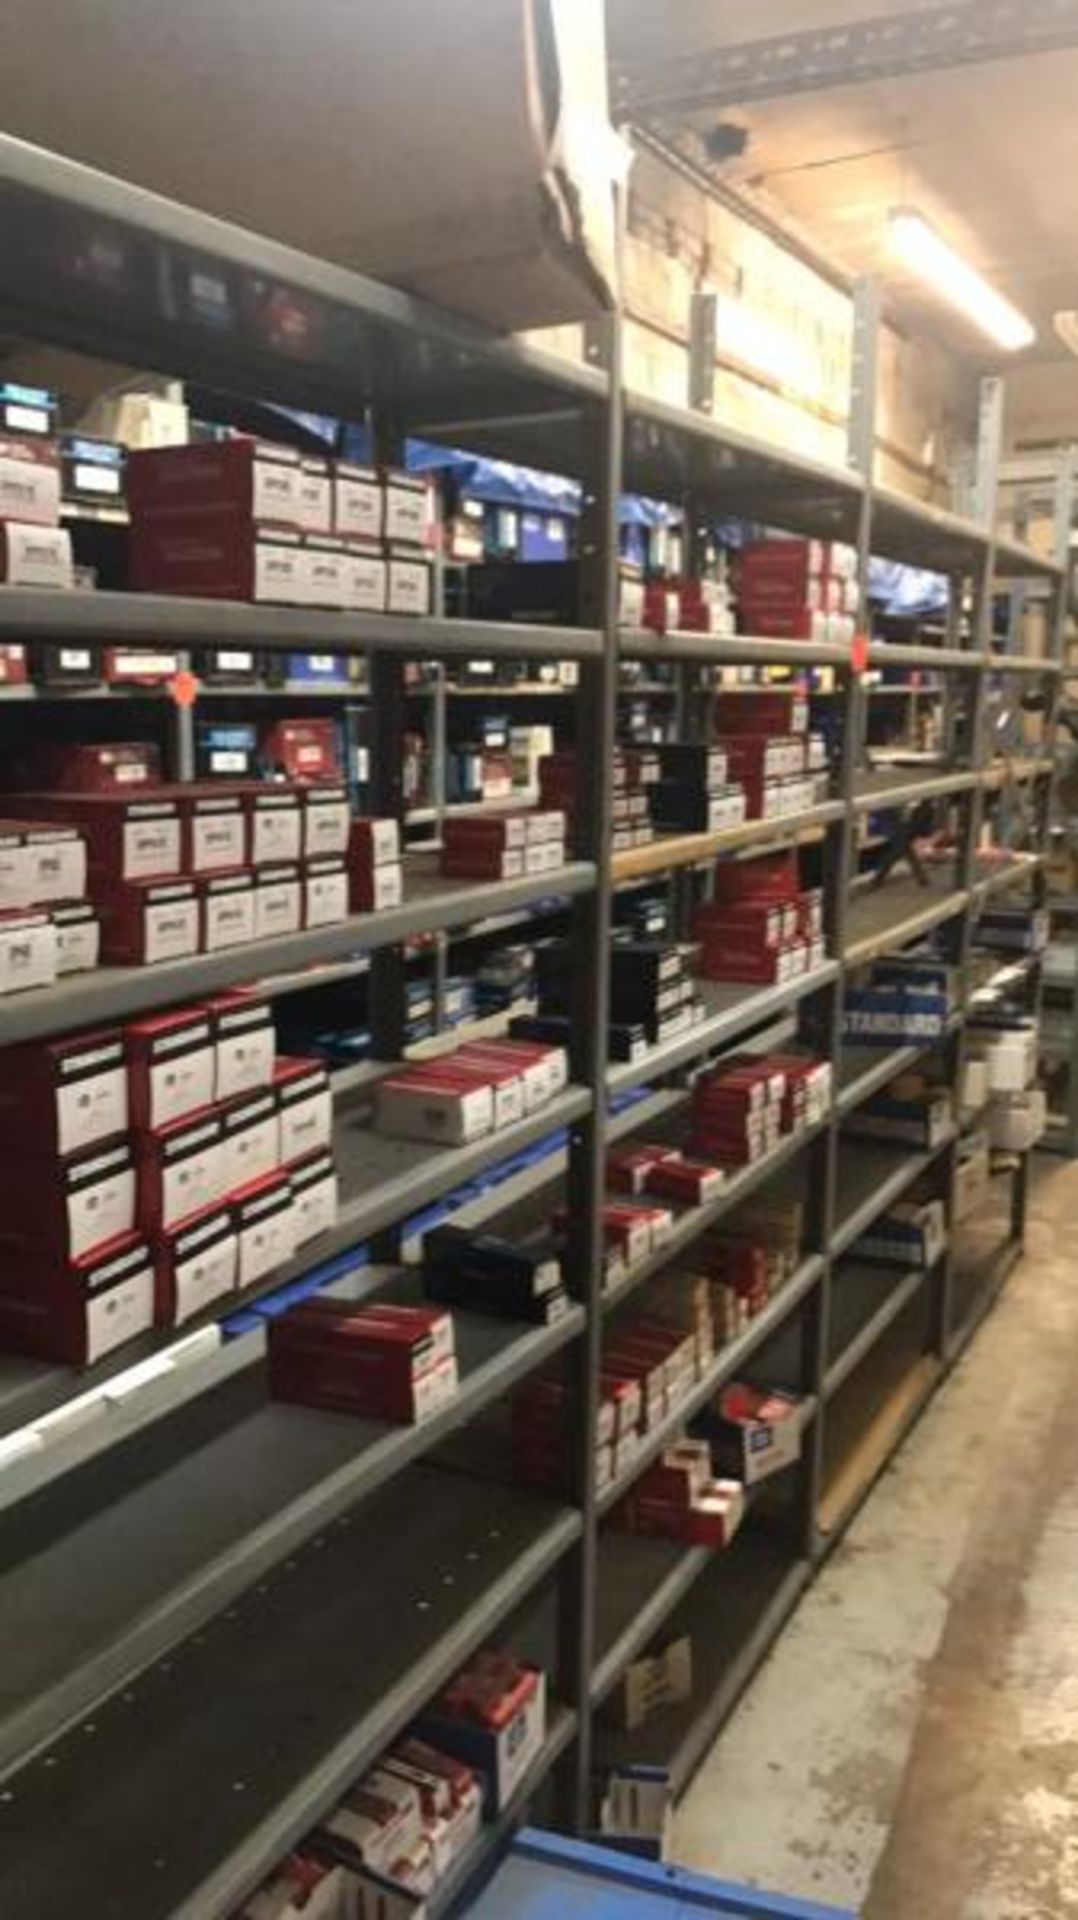 (11) Shelves of Coil on Plug Boot by Standard (11) Shelves of Coil on Plug Boot by Standard and